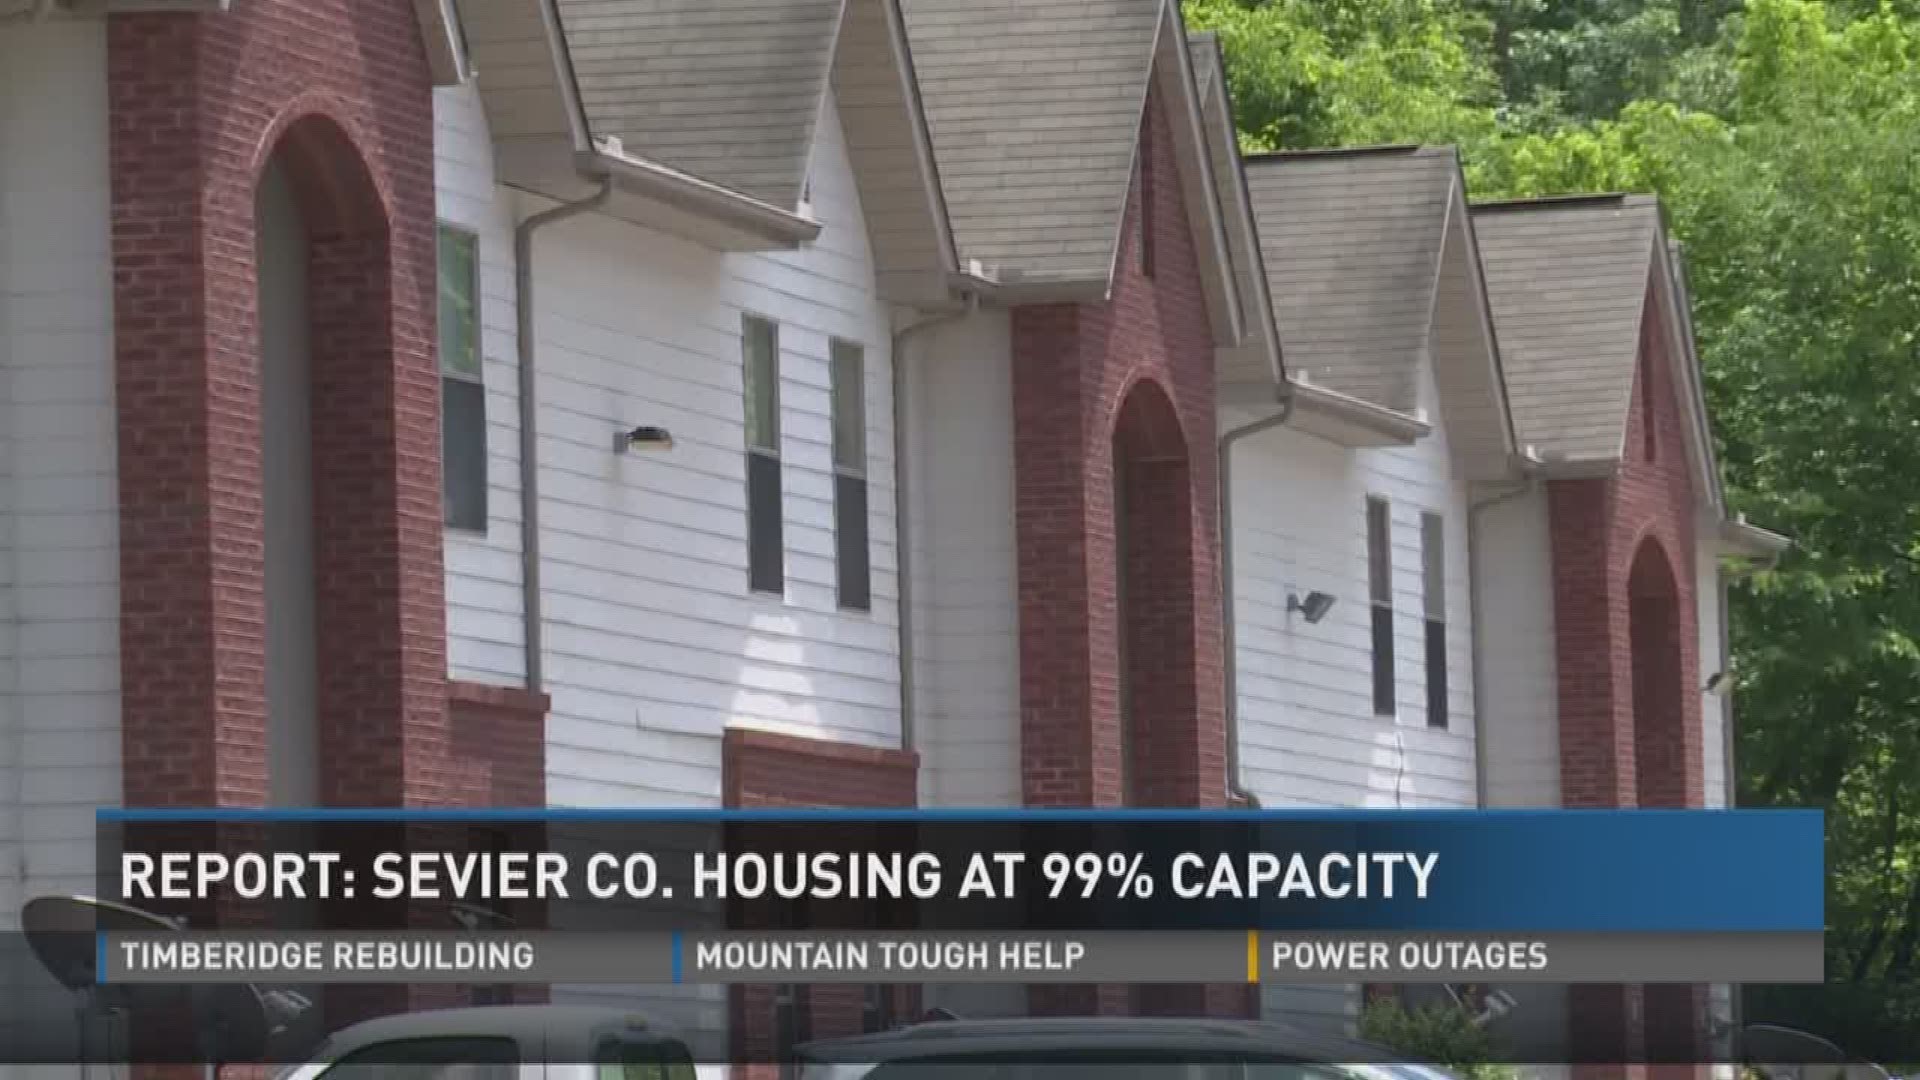 Six months after deadly wildfires tore through Sevier County, a long-awaited new report shows the area contains almost no available housing.